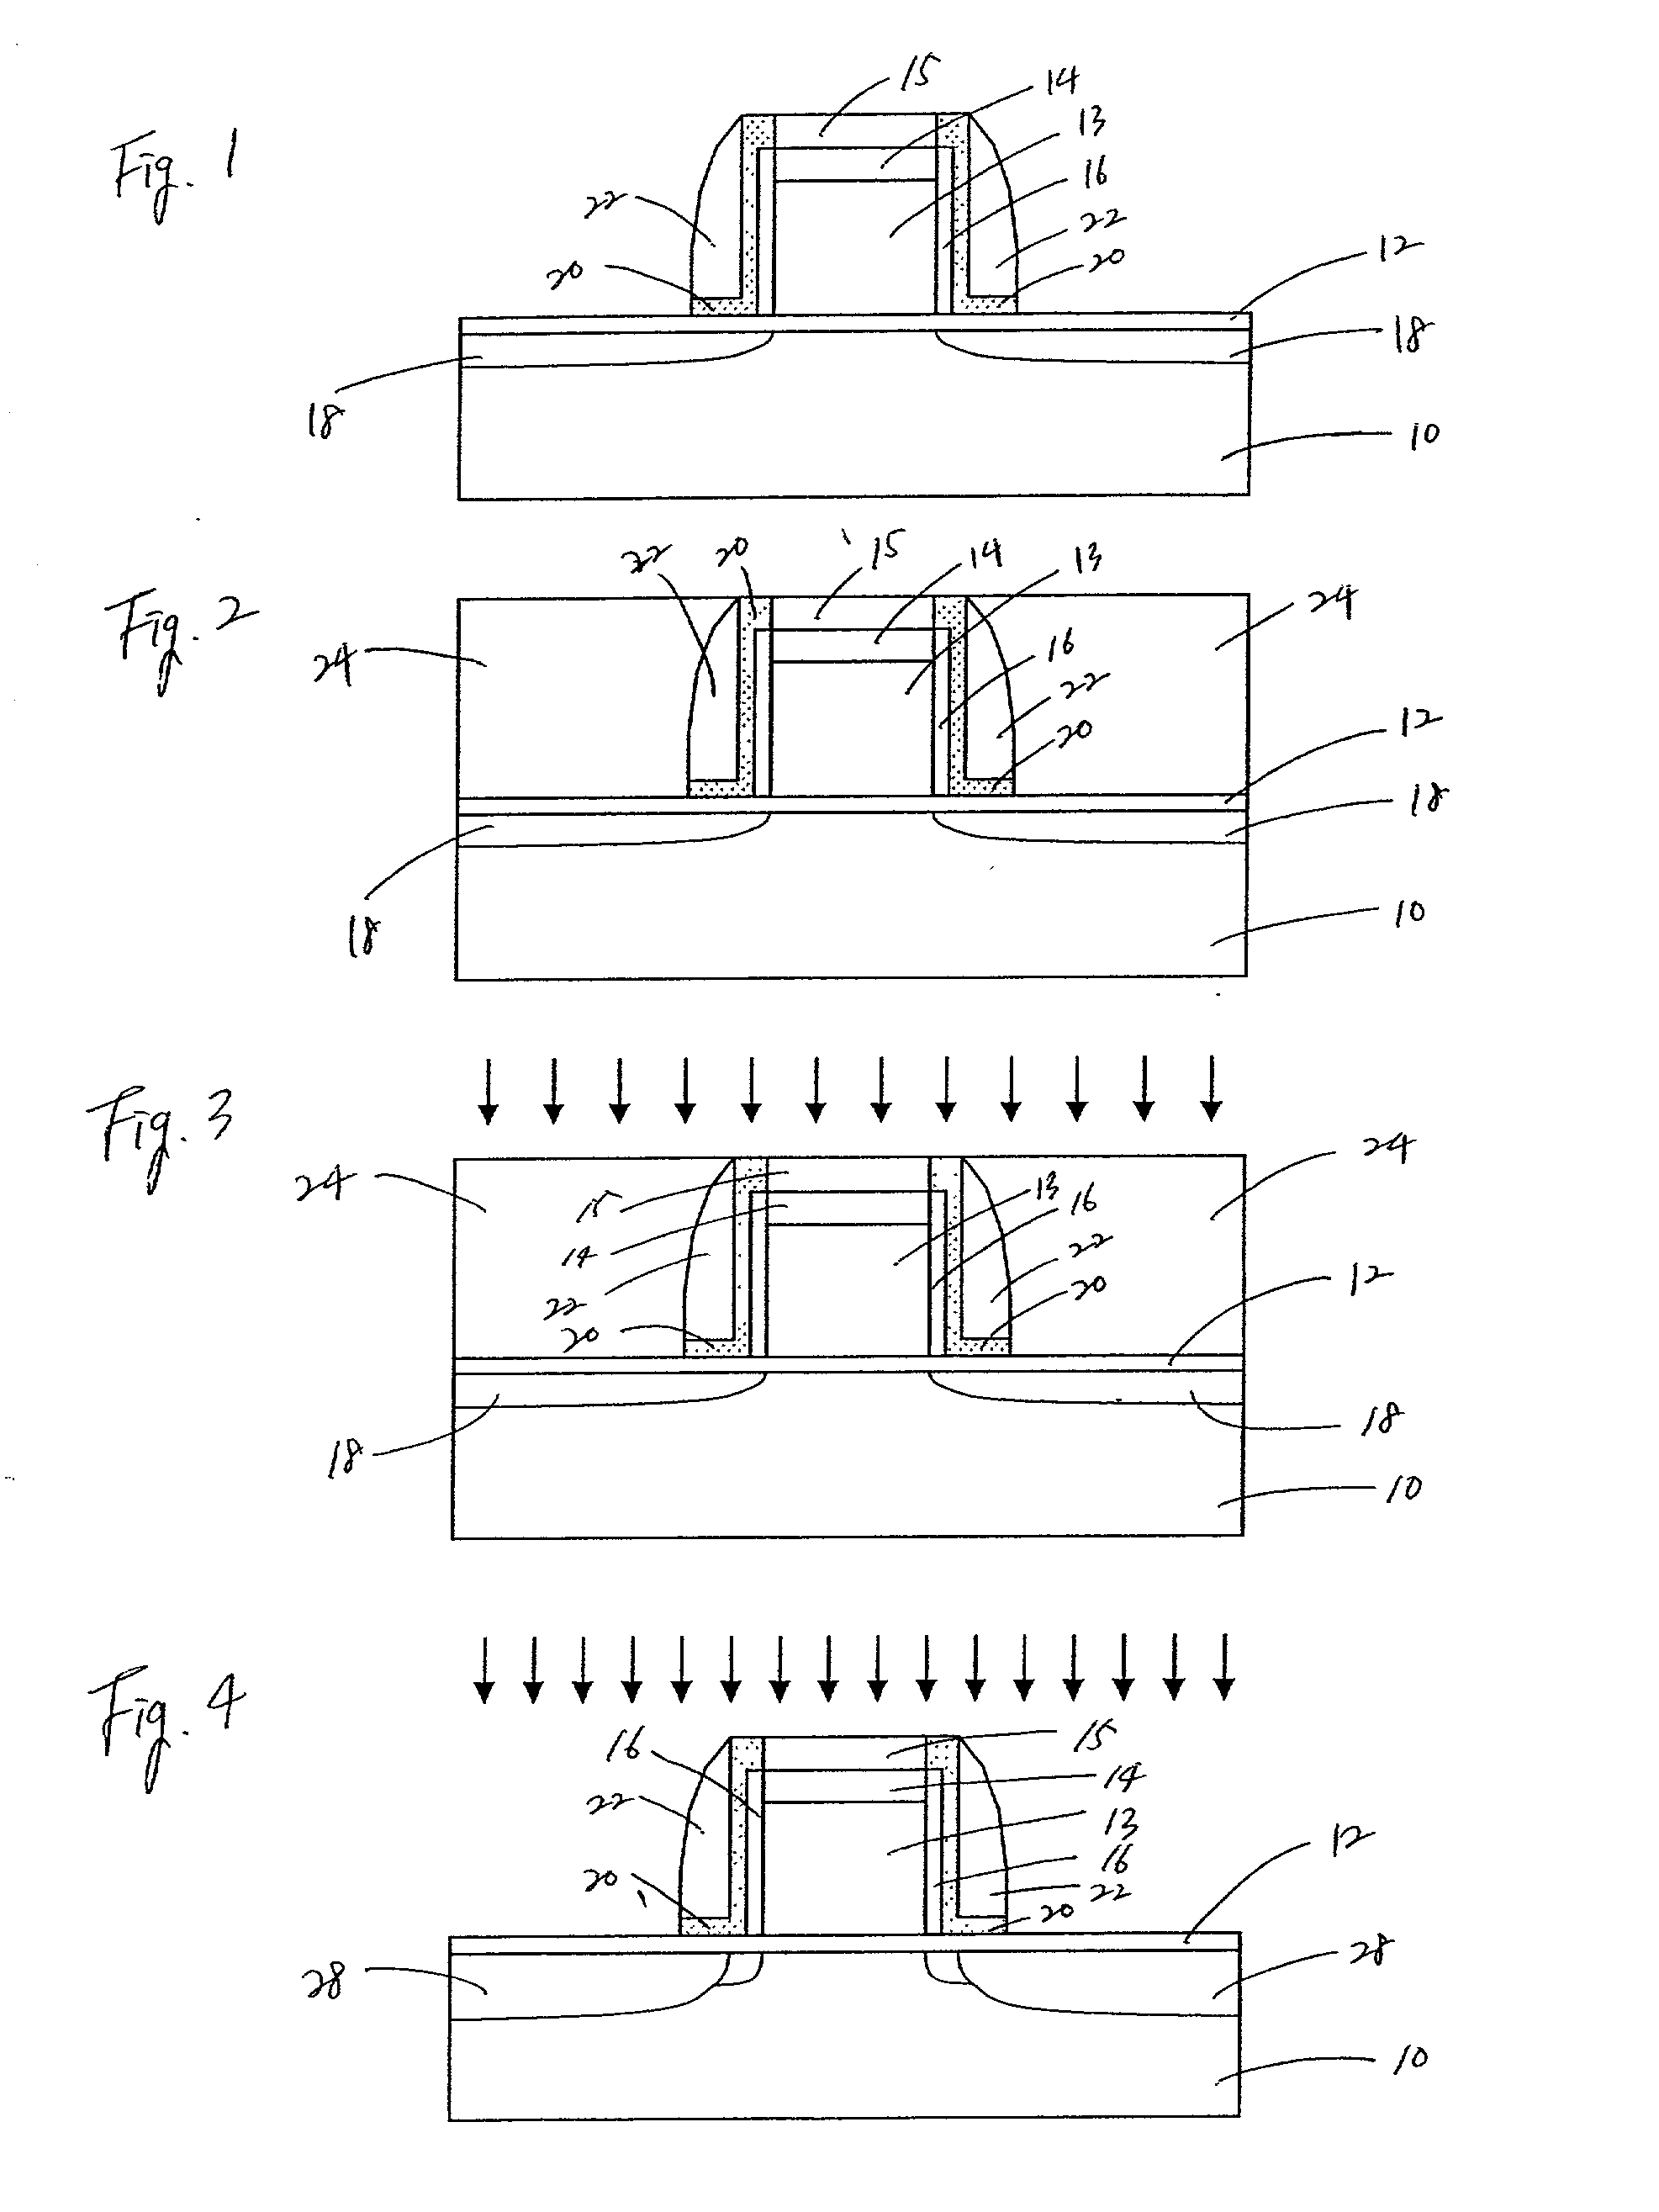 CMOS structure with maximized polysilicon gate activation and a method for selectively maximizing doping activation in gate, extension, and source/drain regions